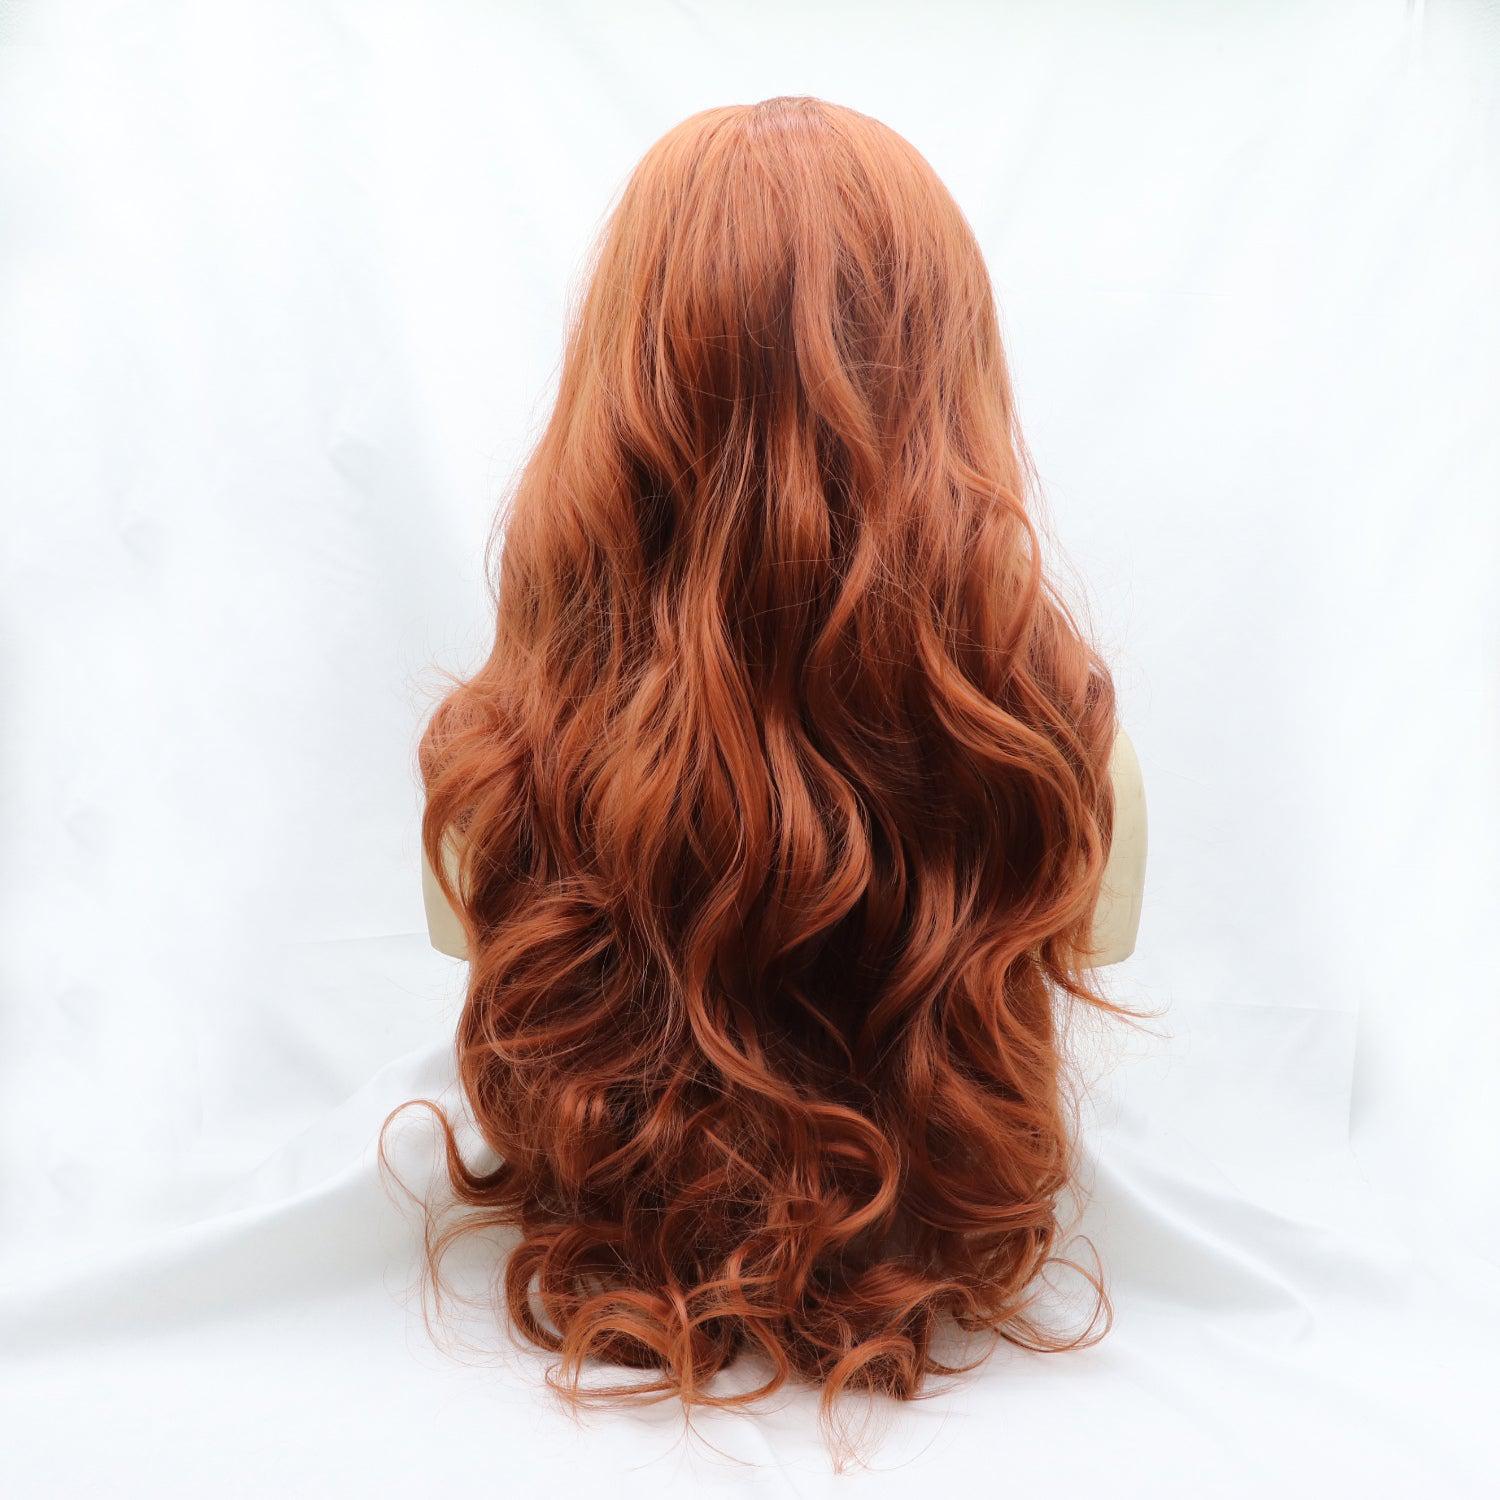 a close up of a woman's long red hair